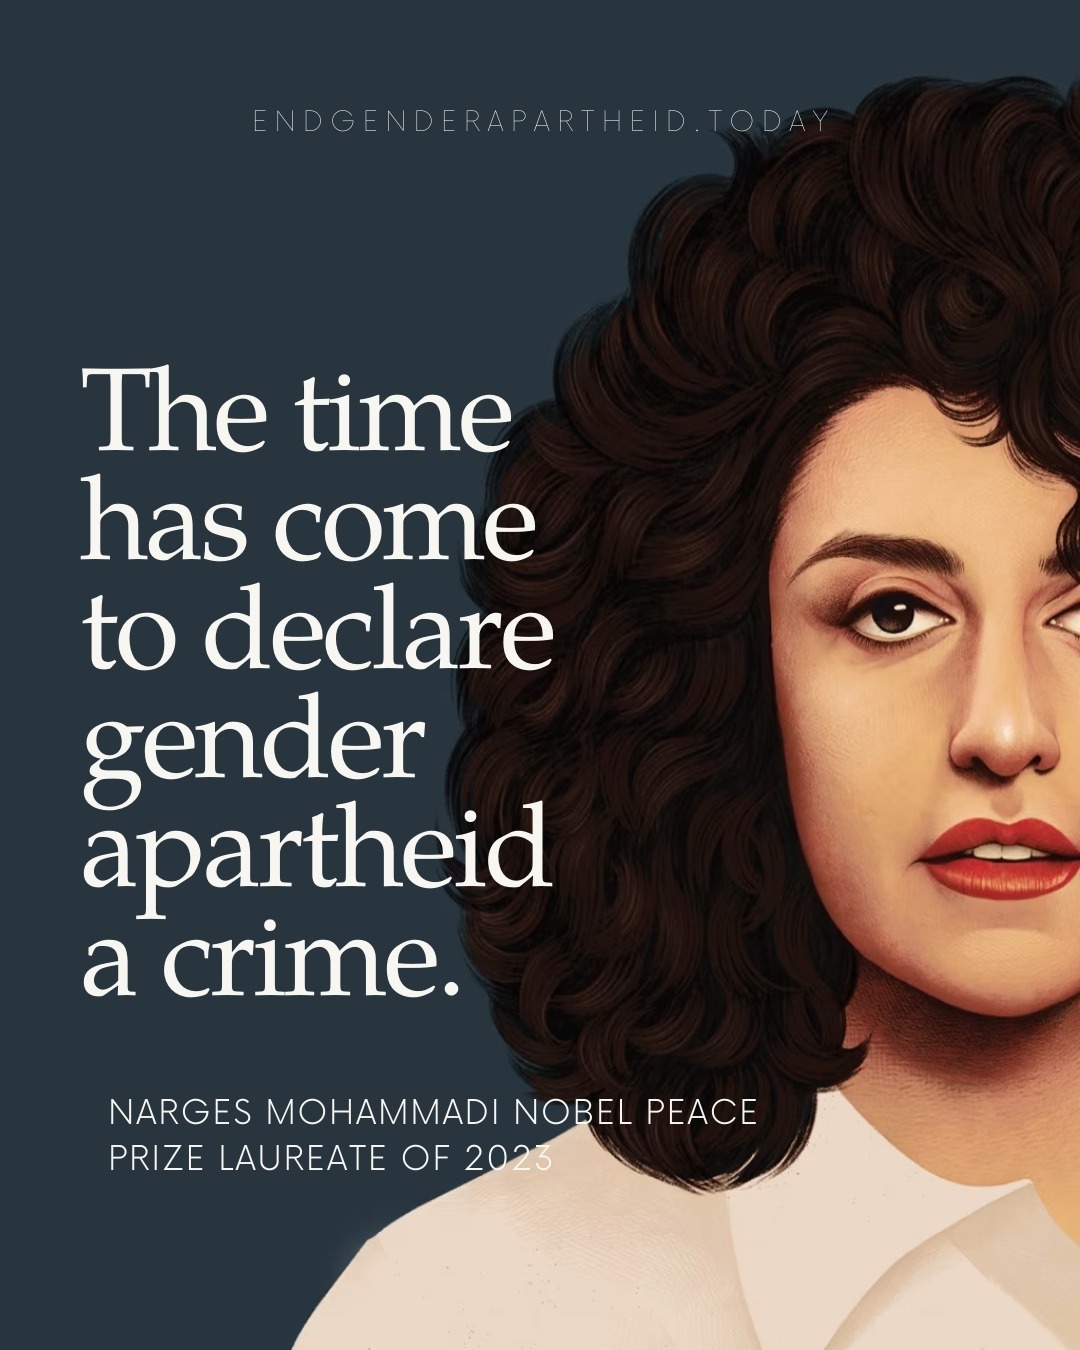 Narges Mohammadi is an Iranian human rights activist. She was awarded the Nobel Peace Prize 2023 for her fight against the oppression of women in Iran and her fight to promote human rights and freedom for all. She is incarcerated in Iran, convicted to 12 years in prison for “propaganda activities against the state”. This text is written from behind the walls of Evin prison.